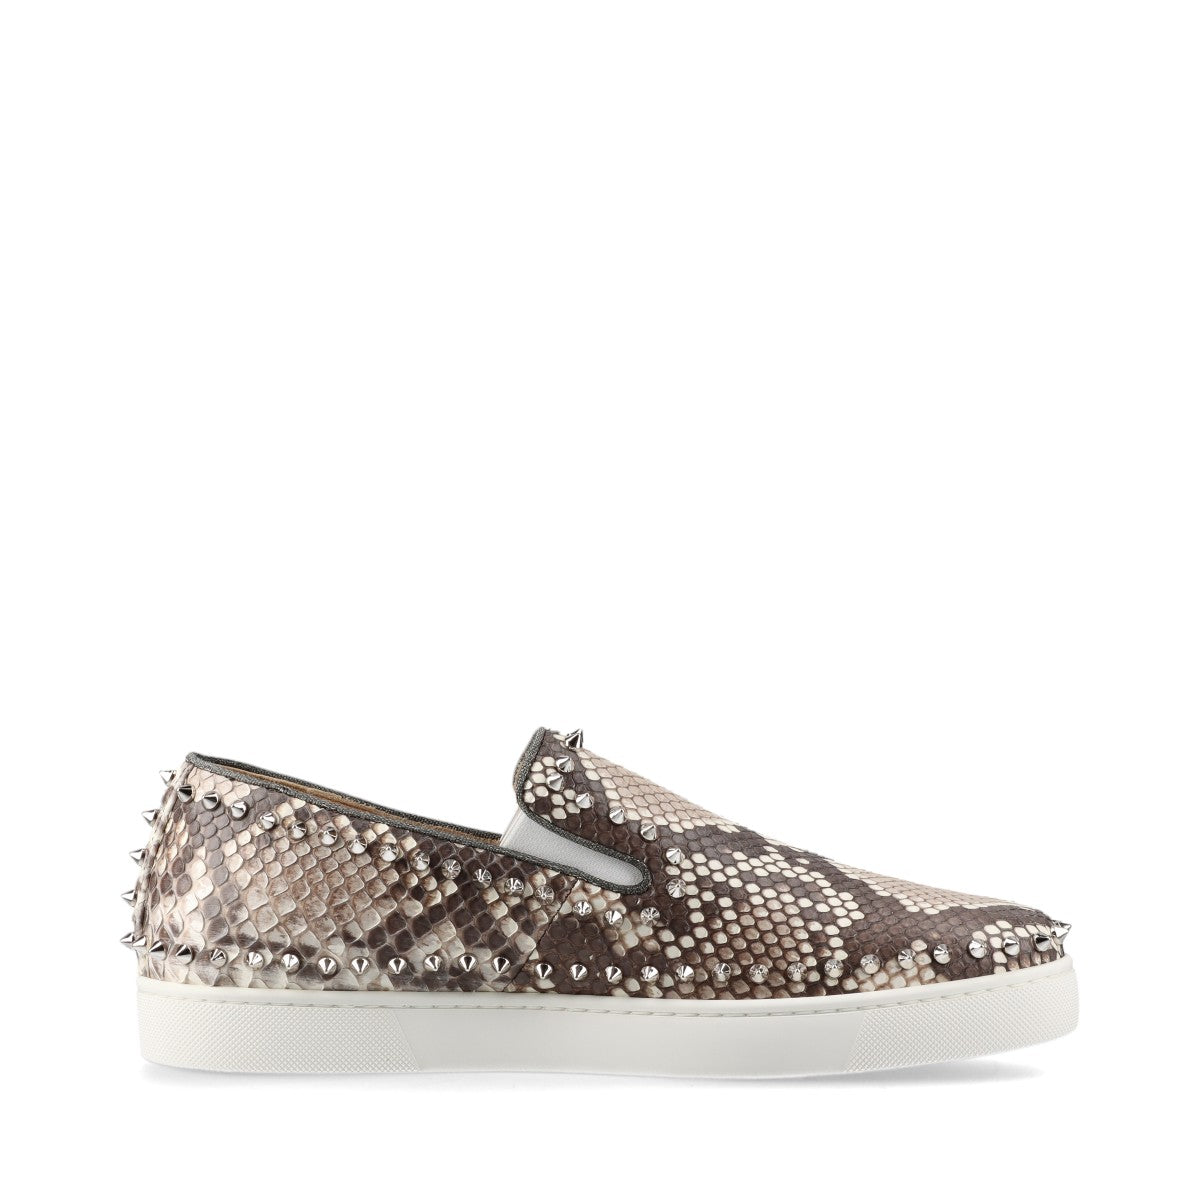 Christian Louboutin pick boat Leather Slip-on 43.5 Men's Gray x brown Spike Studs Python box There is a storage bag